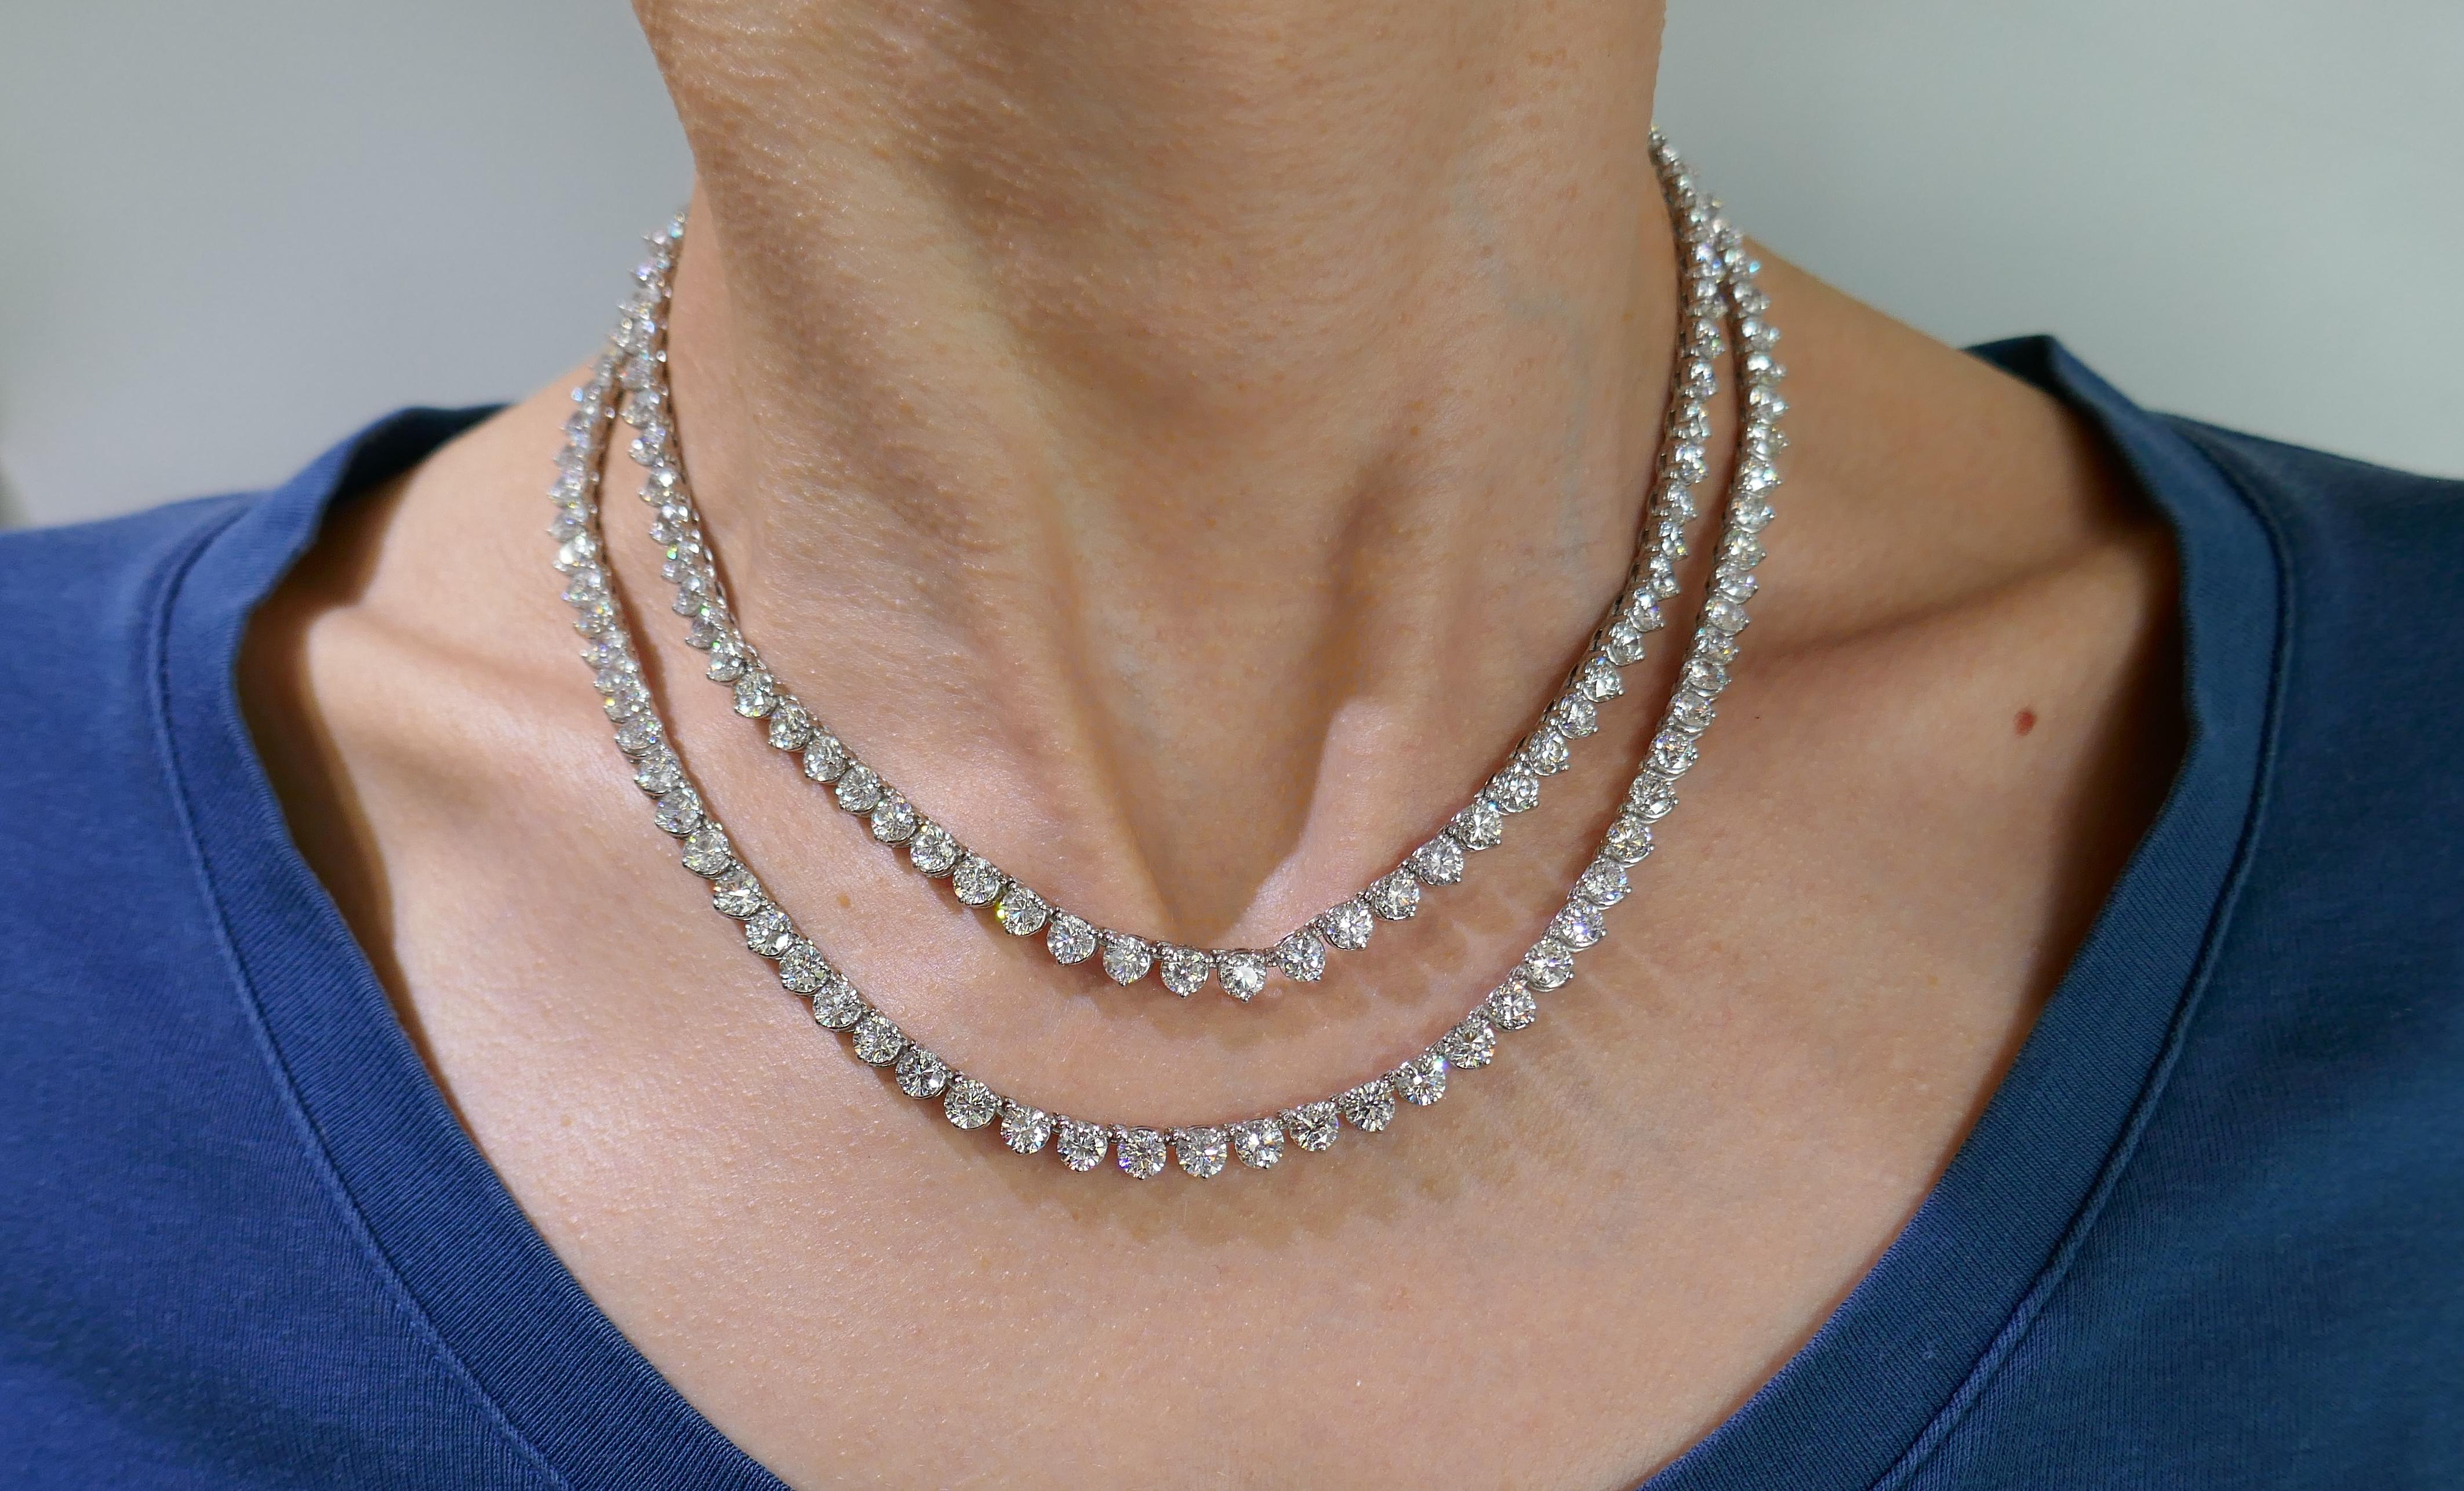 Stunning diamond riviere necklace. Classy, timeless, versatile and wearable, the necklace is a great addition to your jewelry collection.
 The necklace is made of platinum and set with 158 round brilliant cut diamonds. The diamonds are approximately